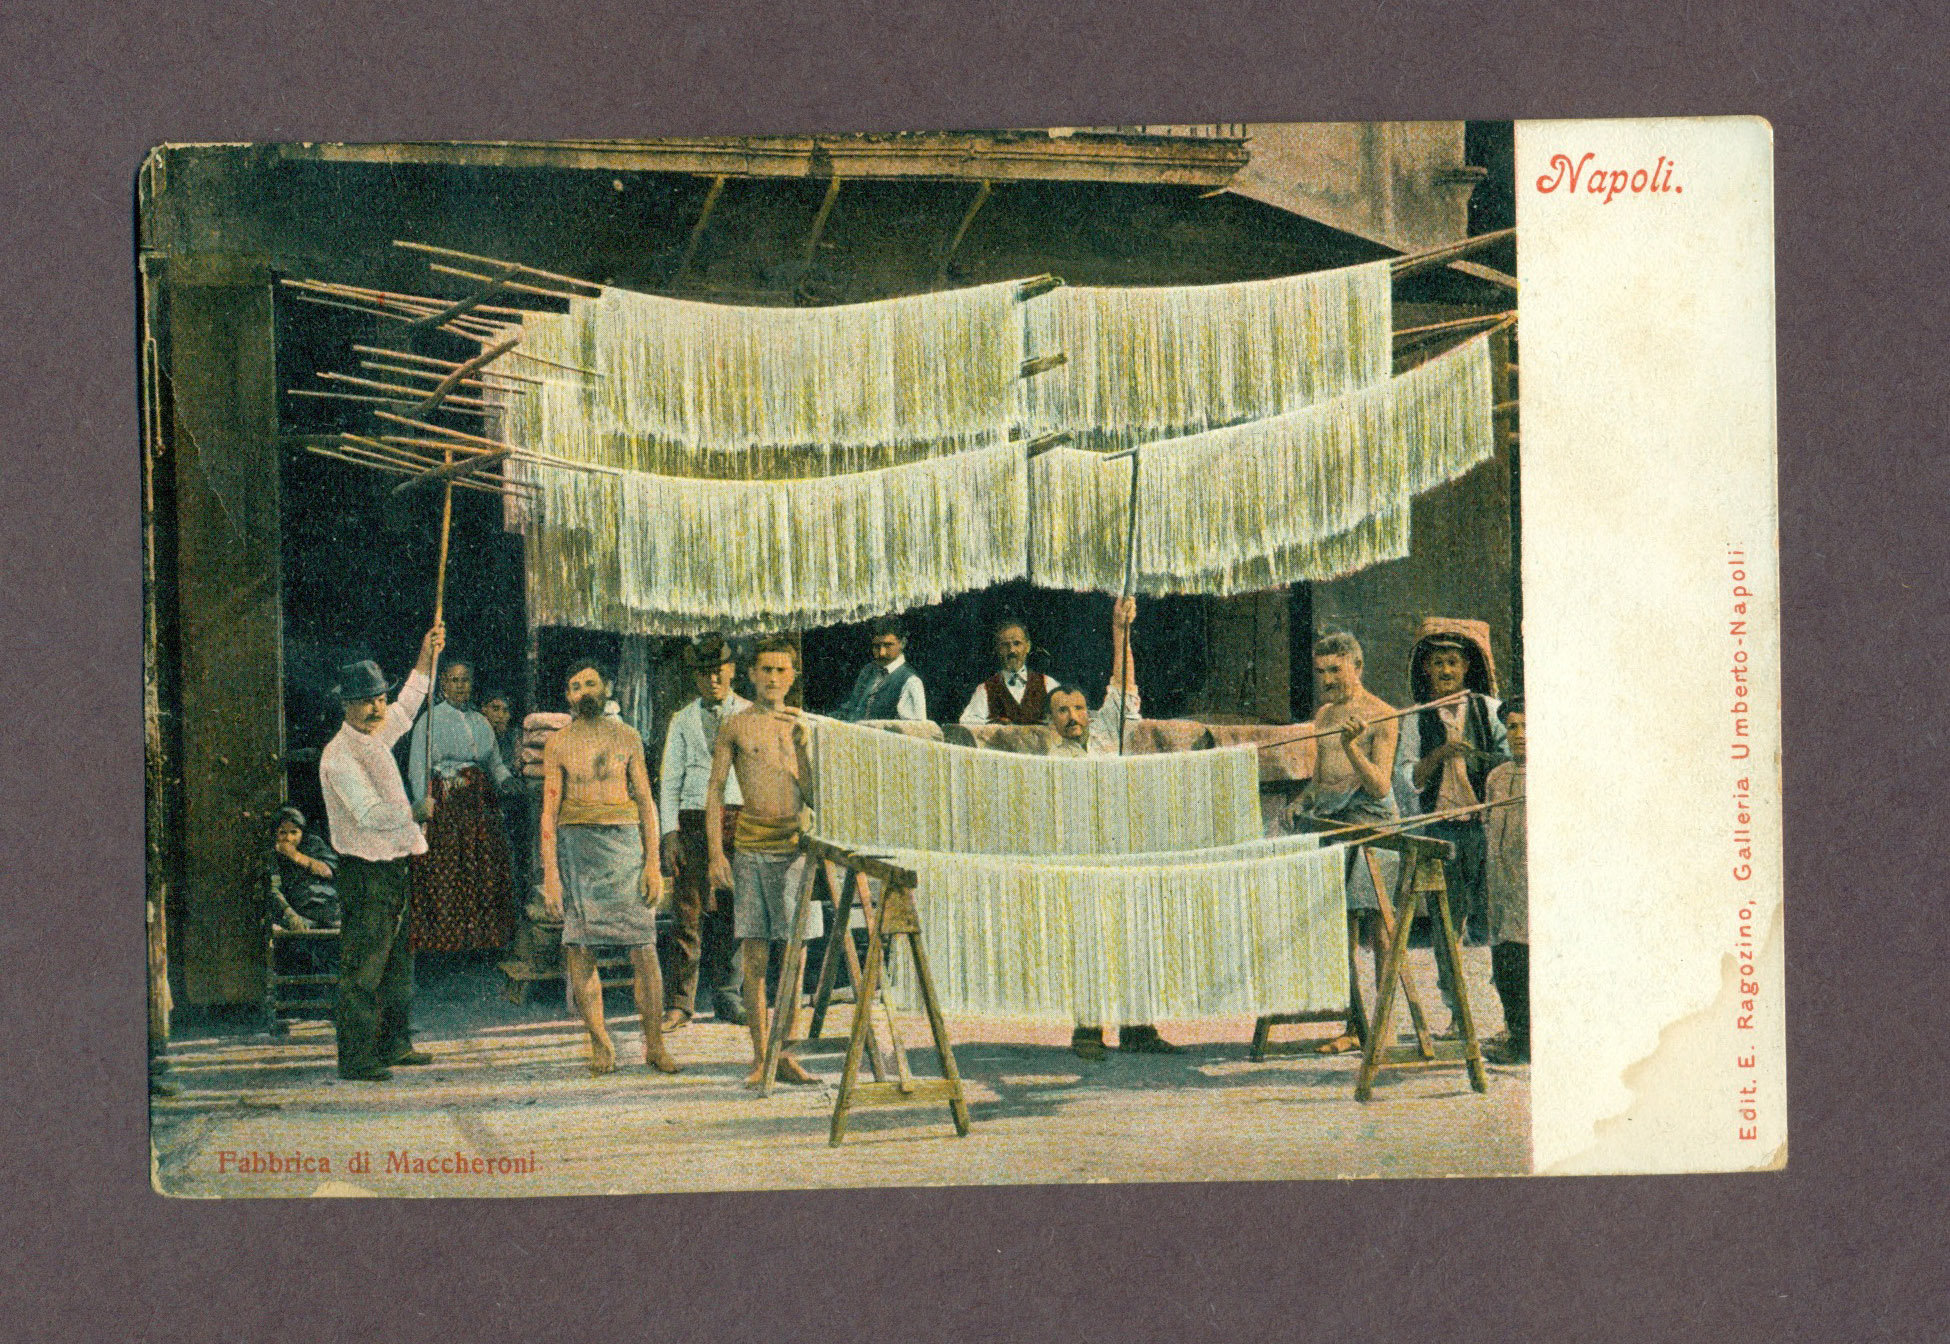 A postcard with an image of several men hanging under pasta-driers with long strands of spaghetti hanging from them. The postcard is titled Napoli.